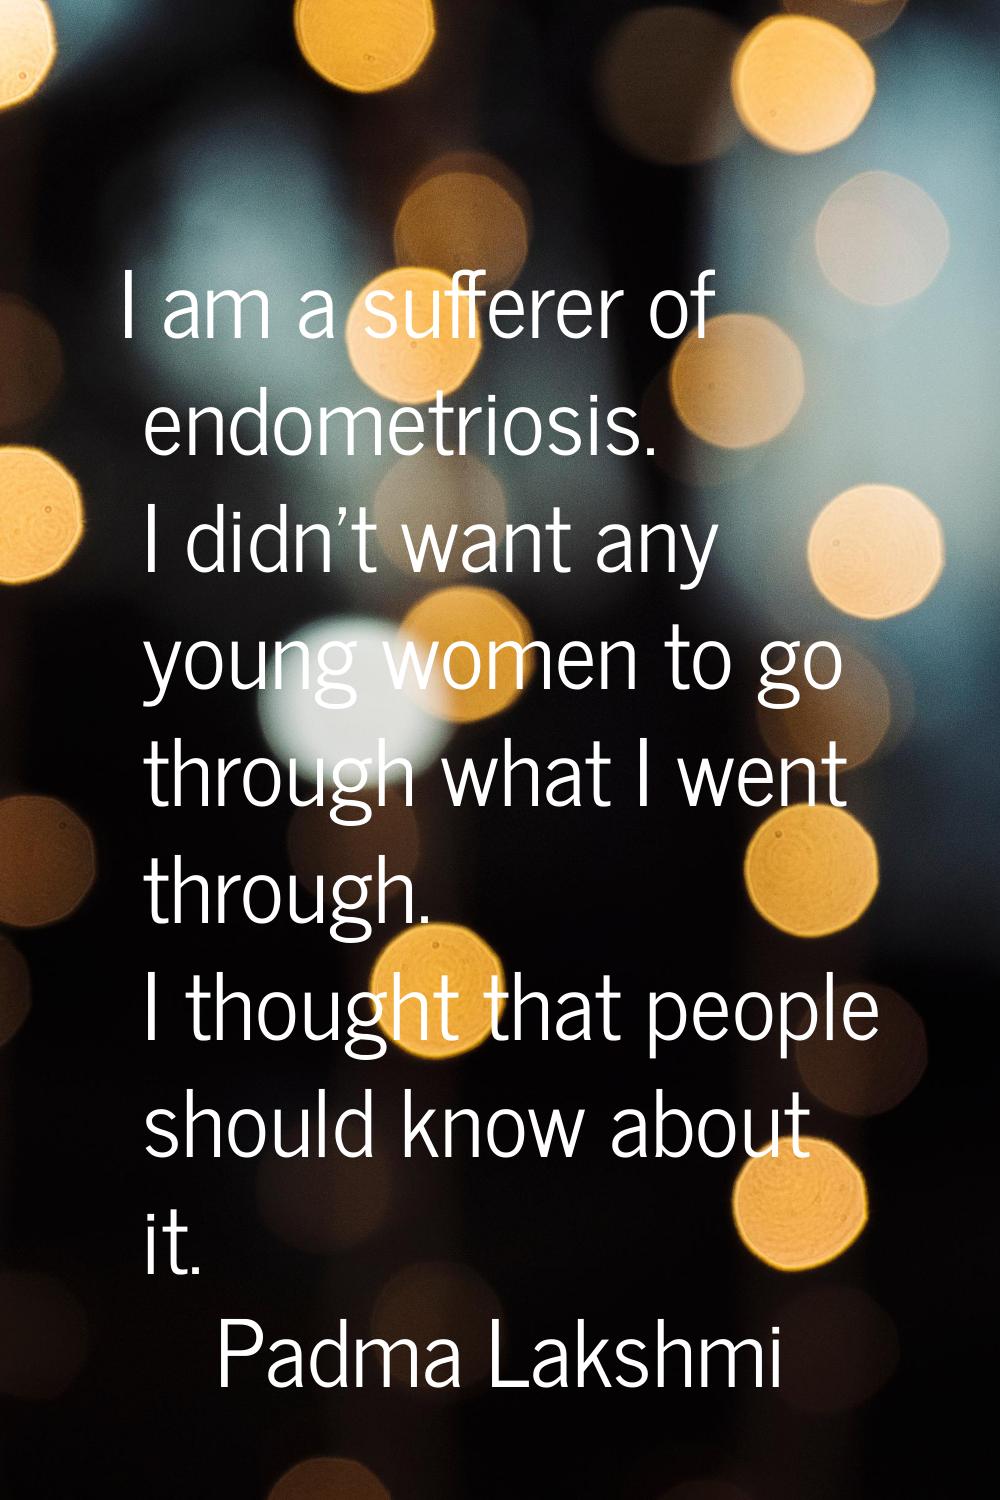 I am a sufferer of endometriosis. I didn't want any young women to go through what I went through. 